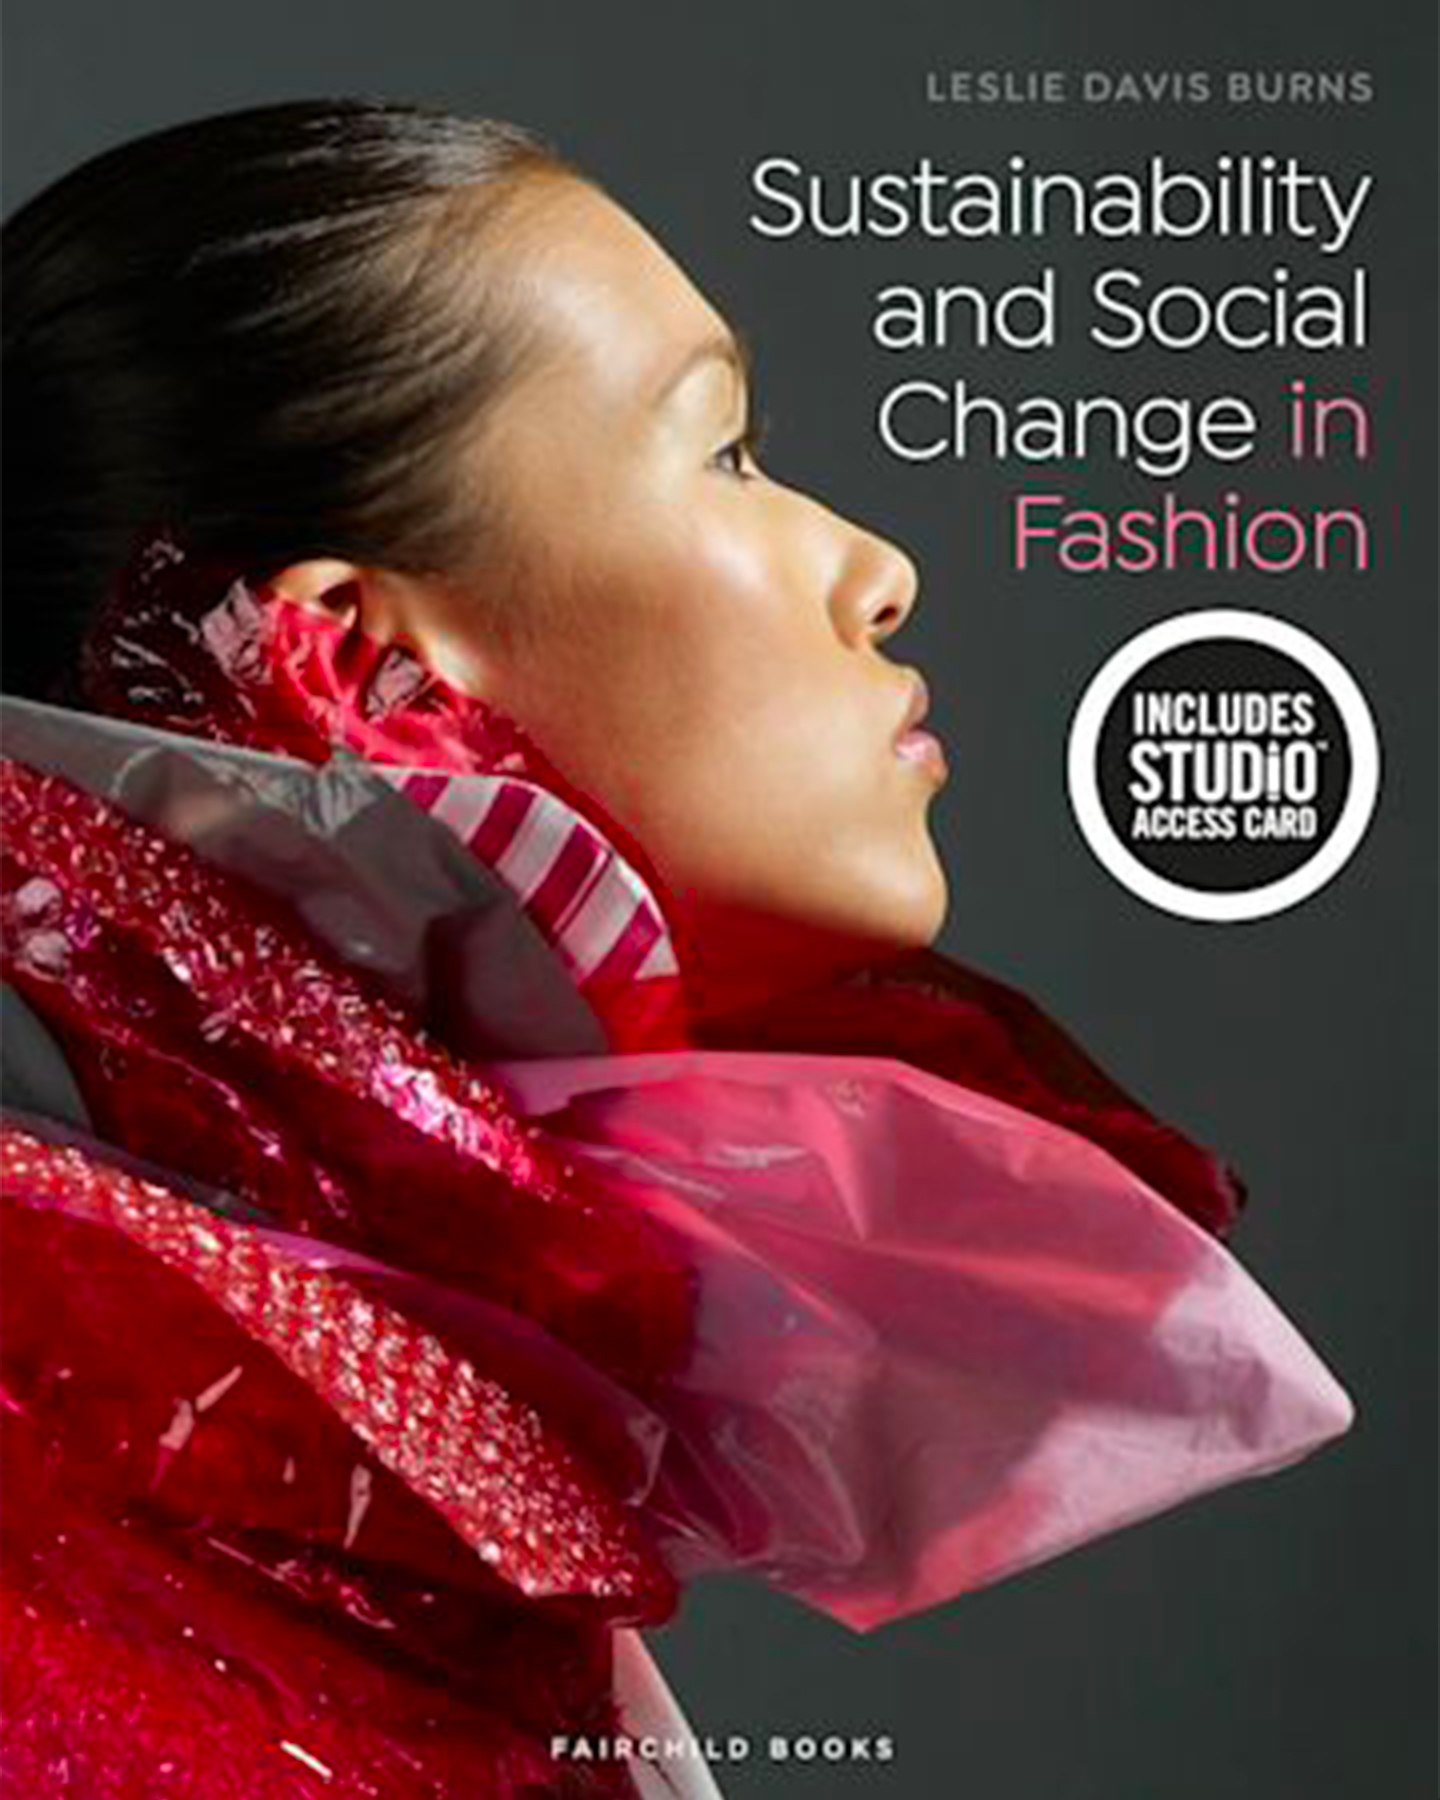 Burns, L.D. (2019) Sustainability and Social Change in Fashion. New York: Fairchild Books